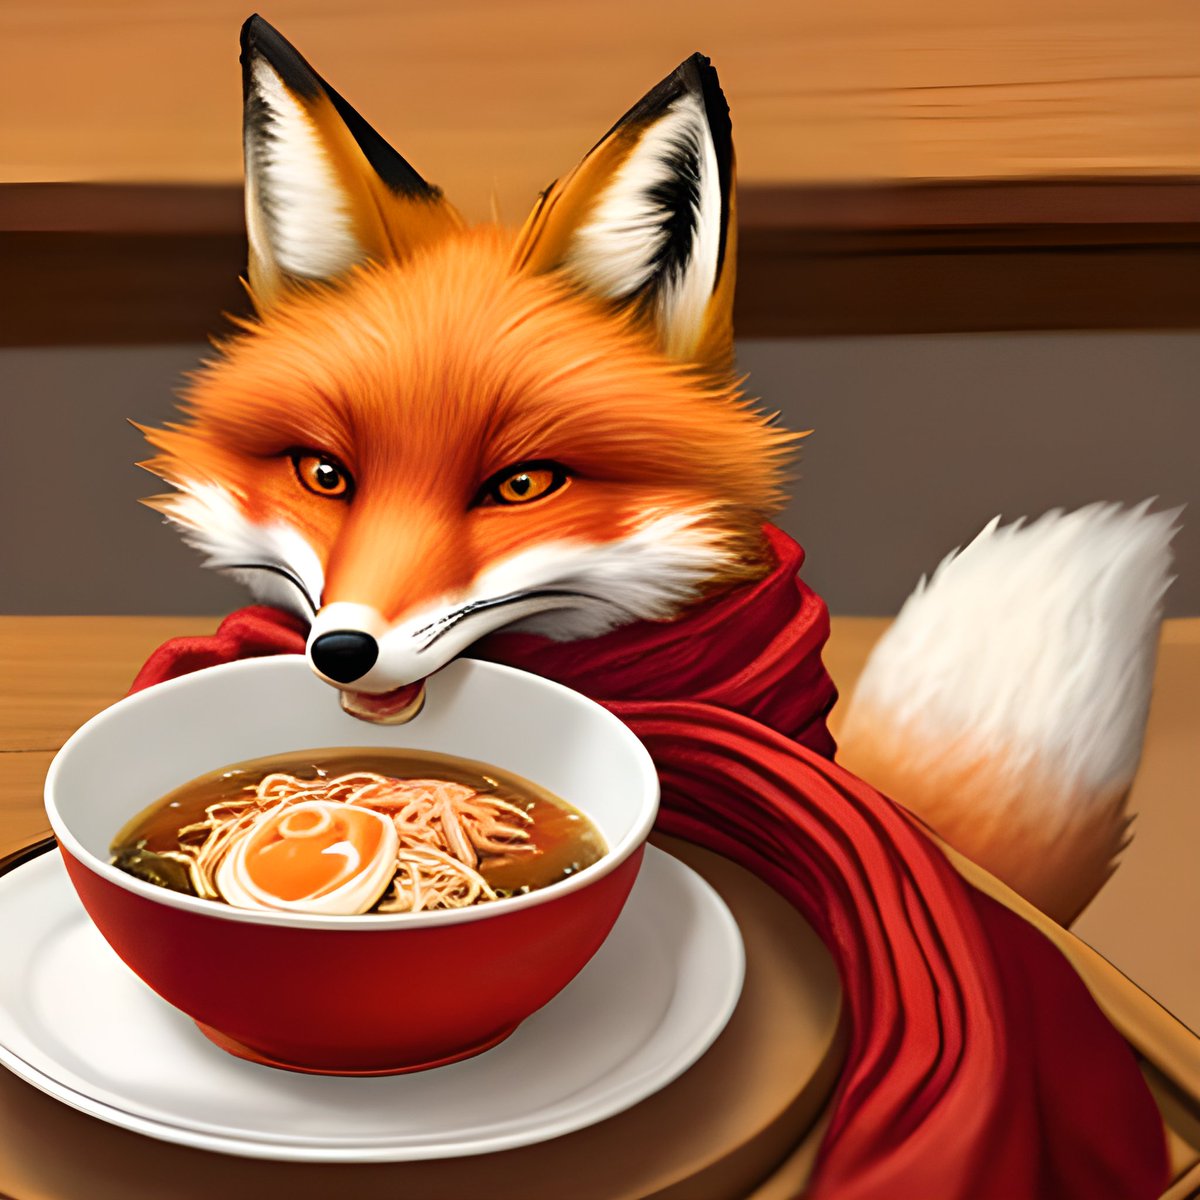 Nyx Loves Ramen, that's for sure.

#RisingFox #IndieGameDev #Unity #unity2d #metroidvania #gamedev #2dgame #indiegames #indiegame #pixelart #madeinunity #screenshotsaturday #madewithunity